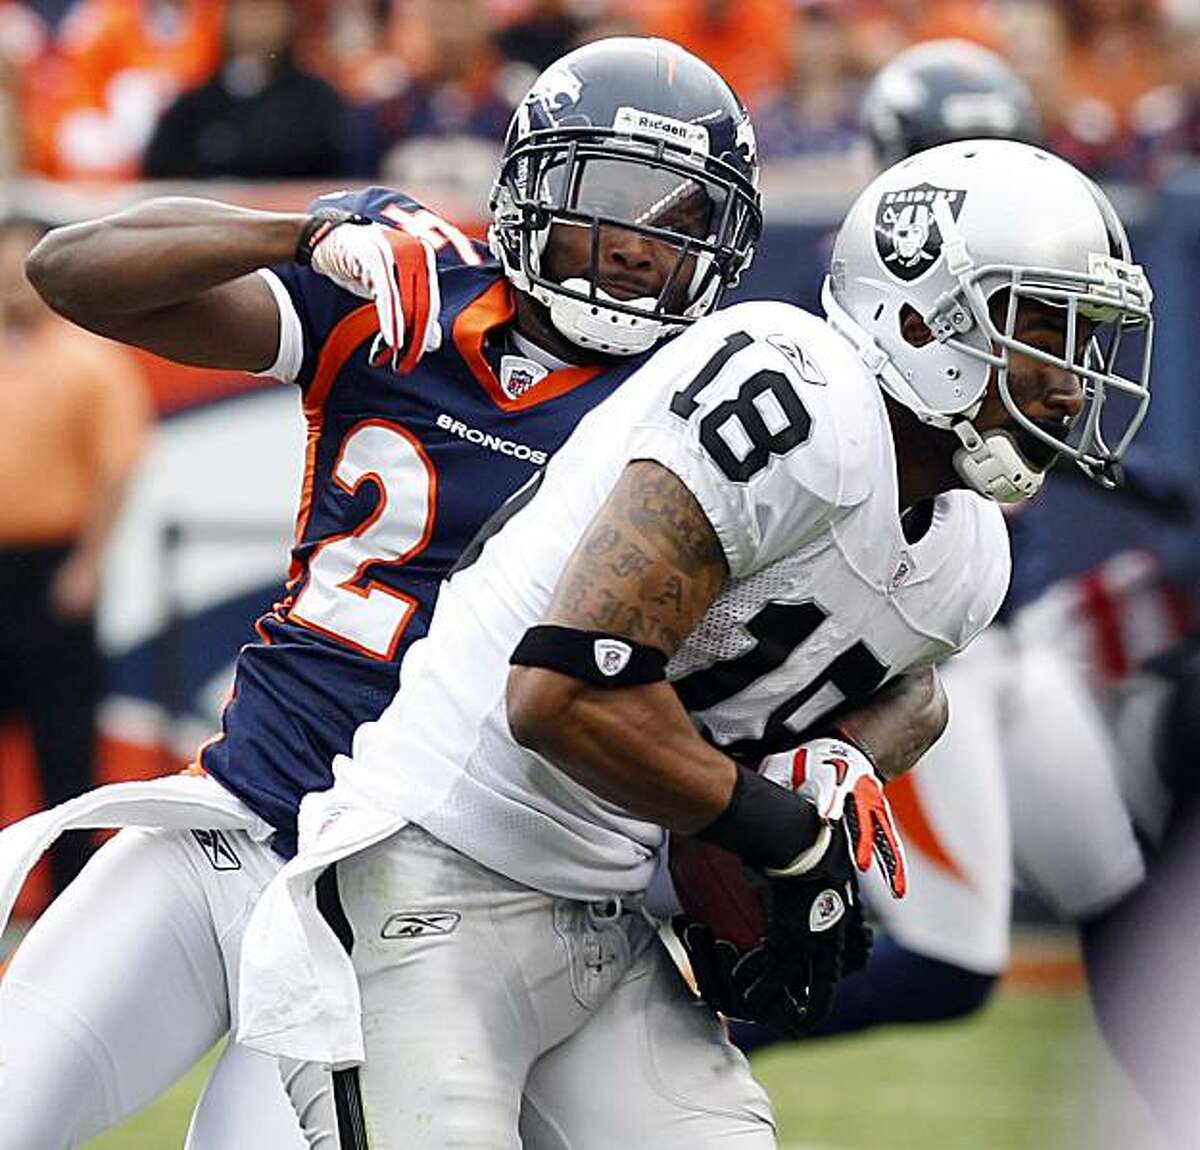 Denver Broncos cornerback Champ Bailey, left, breaks up a pass intended for Oakland Raiders wide receiver Louis Murphy (18) during the first half of an NFL football game, Sunday, Oct. 24, 2010, in Denver.